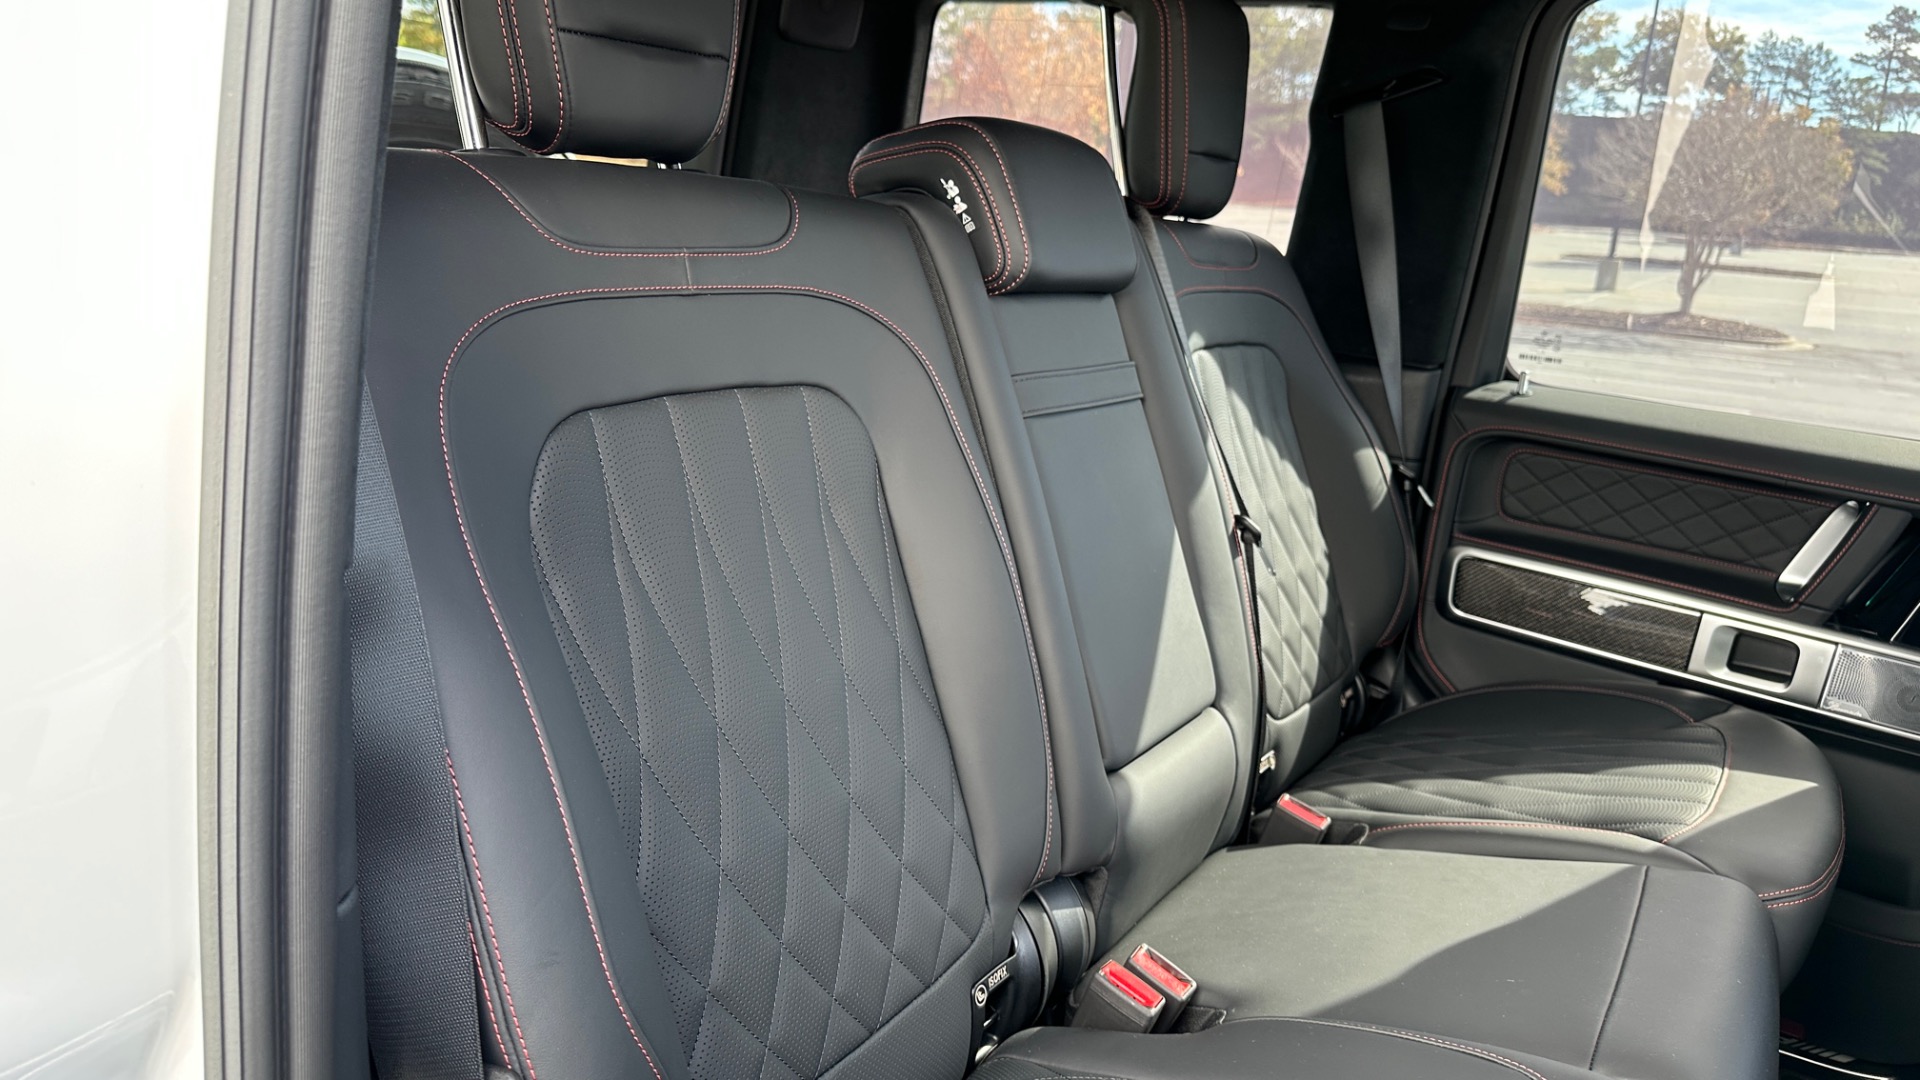 Used 2021 Mercedes-Benz G-Class AMG G63 / AMG EXCLUSIVE INTERIOR / CARBON FIBER / DIAMOND STITCH / 21IN AMG for sale $229,000 at Formula Imports in Charlotte NC 28227 23